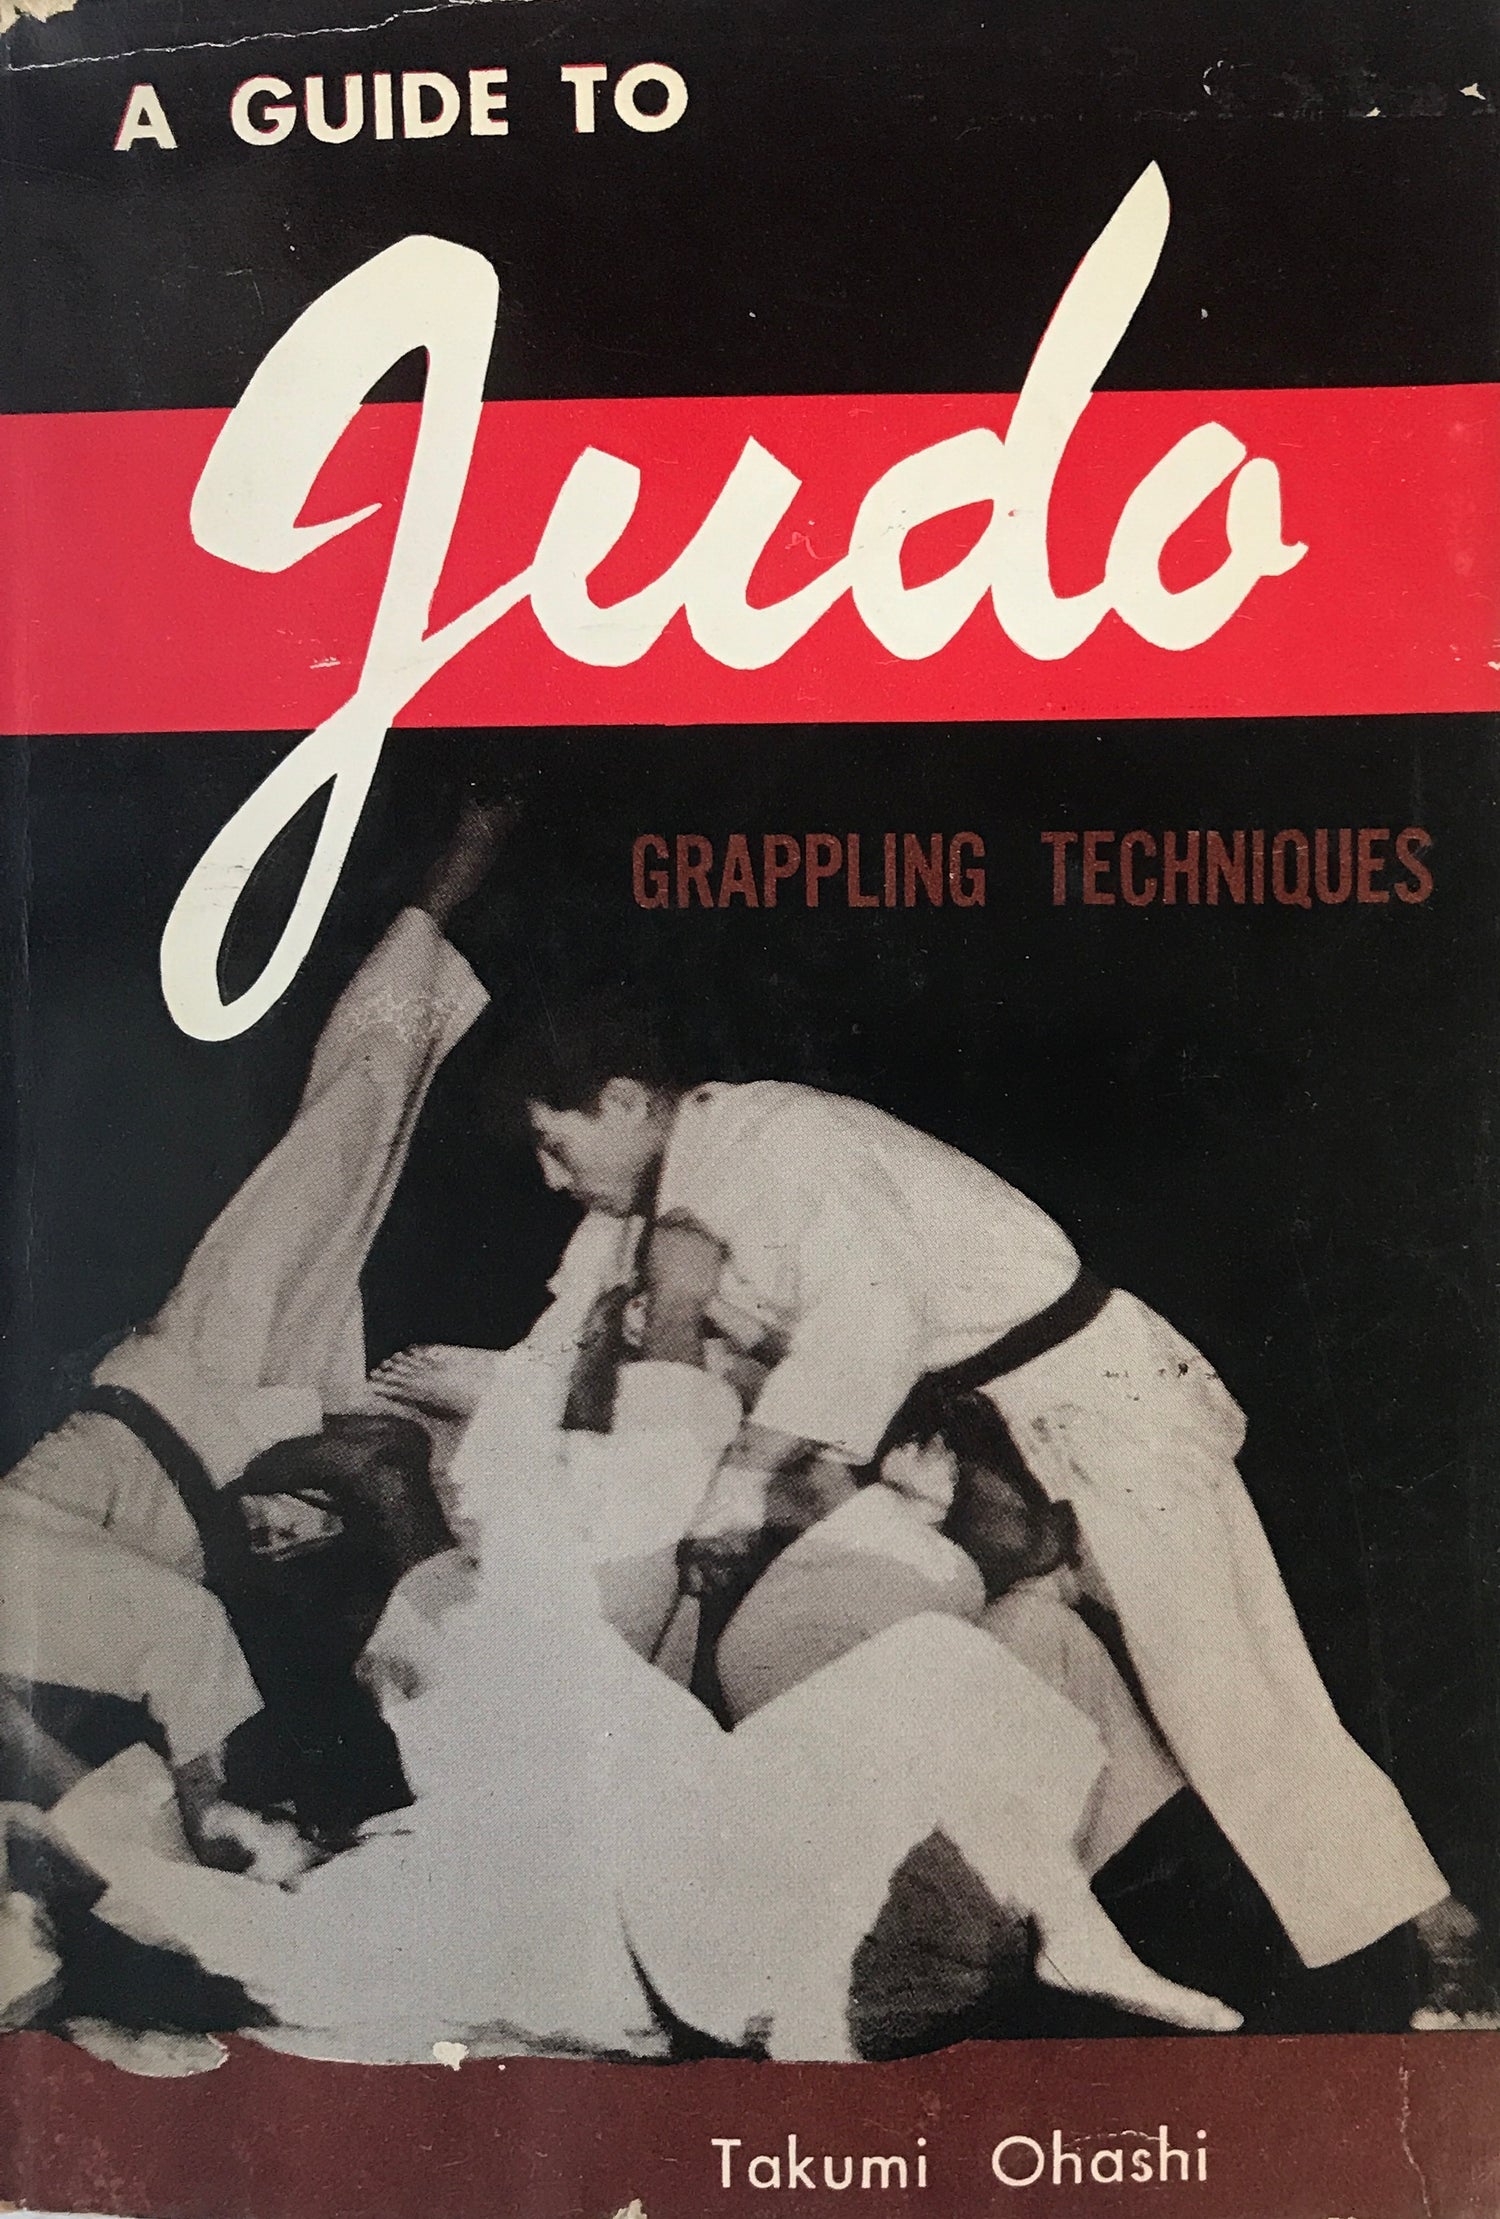 A Guide to Judo Grappling Techniques Book by Takumi Okashi (Hardcover) (Preowned) - Budovideos Inc